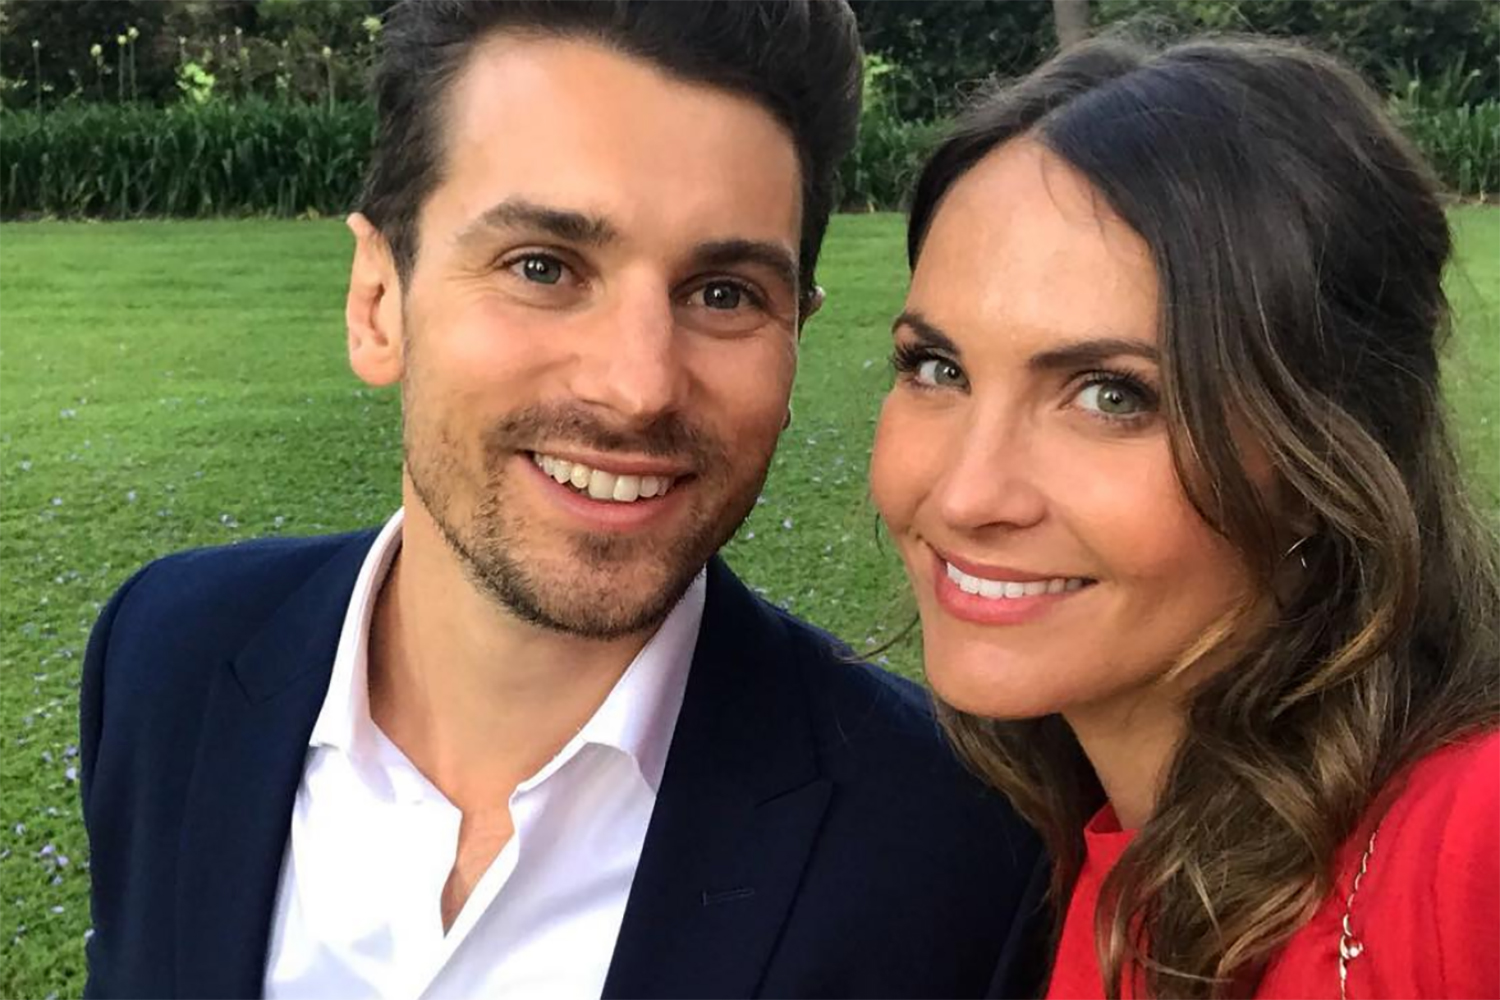 The Bachelor’s Laura Byrne Responds To Reports She’s Split With Matty J